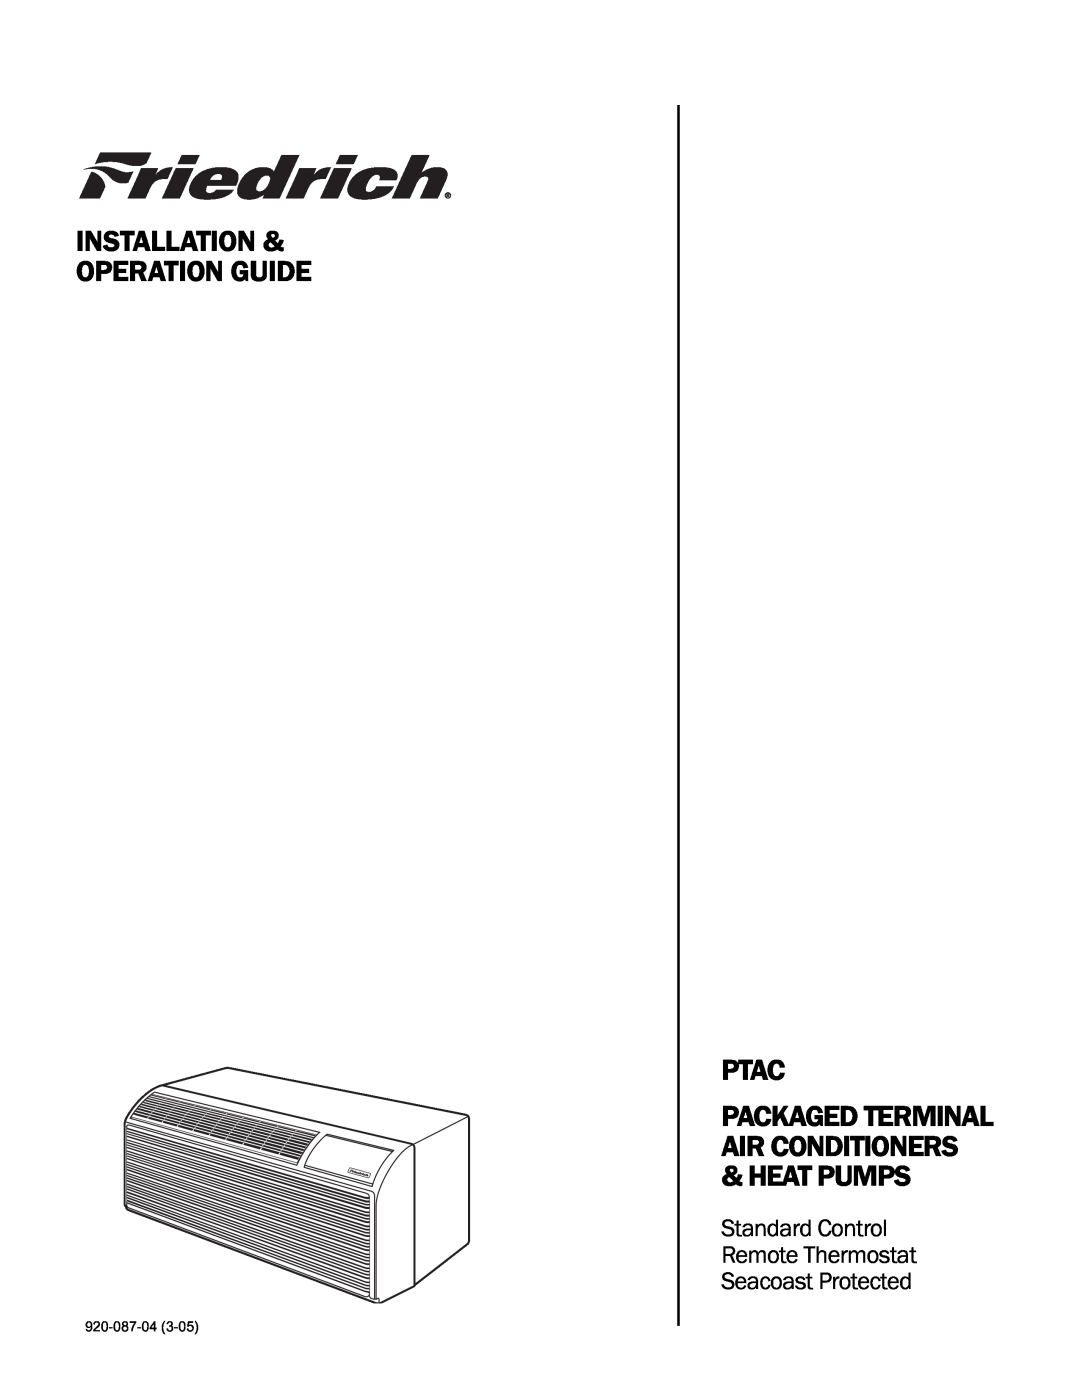 Friedrich 920-087-04 (3-05) manual Ptac, Standard Control Remote Thermostat, Seacoast Protected 